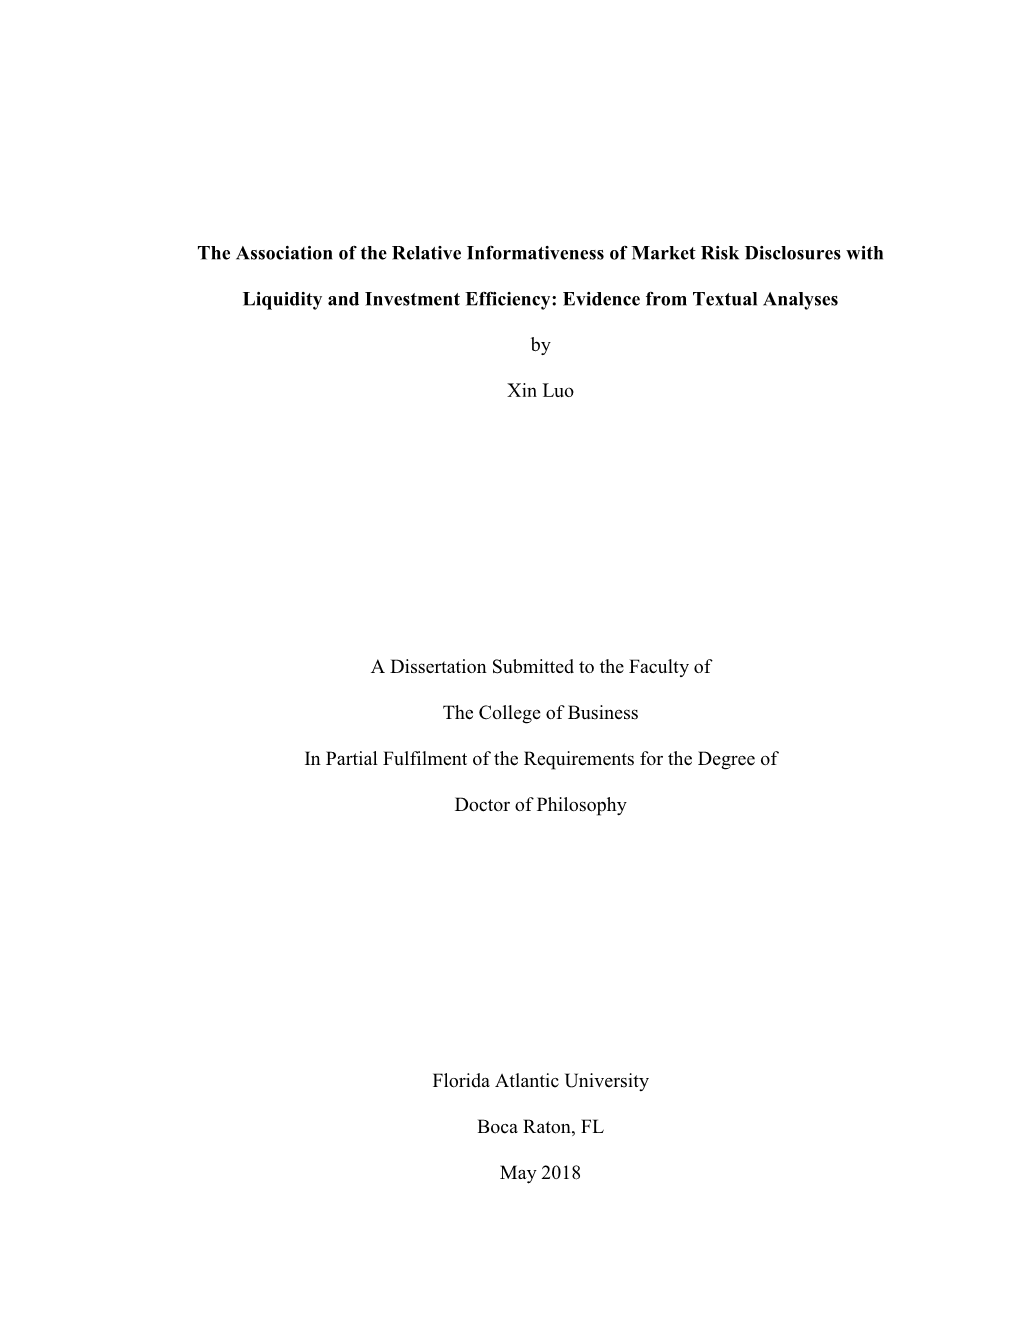 The Association of the Relative Informativeness of Market Risk Disclosures With